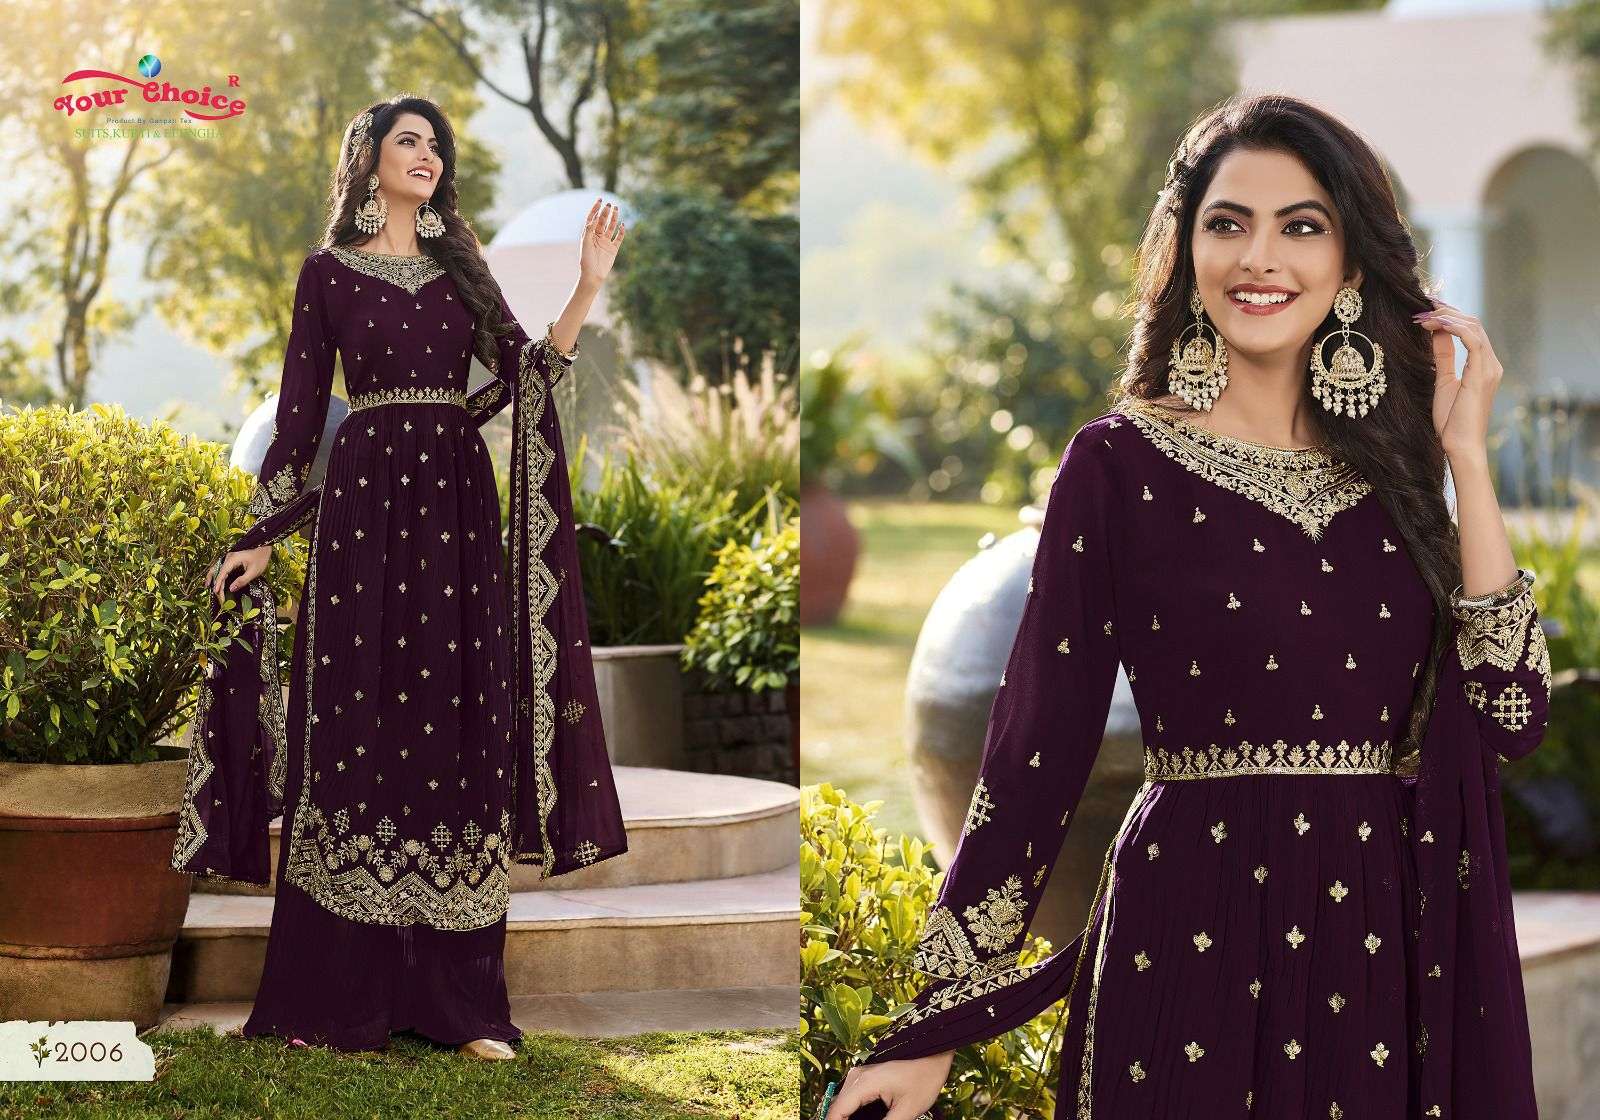 your choice iconic nayra vol-2 2001-2006 series function special designer salwar suits catalogue online market surat